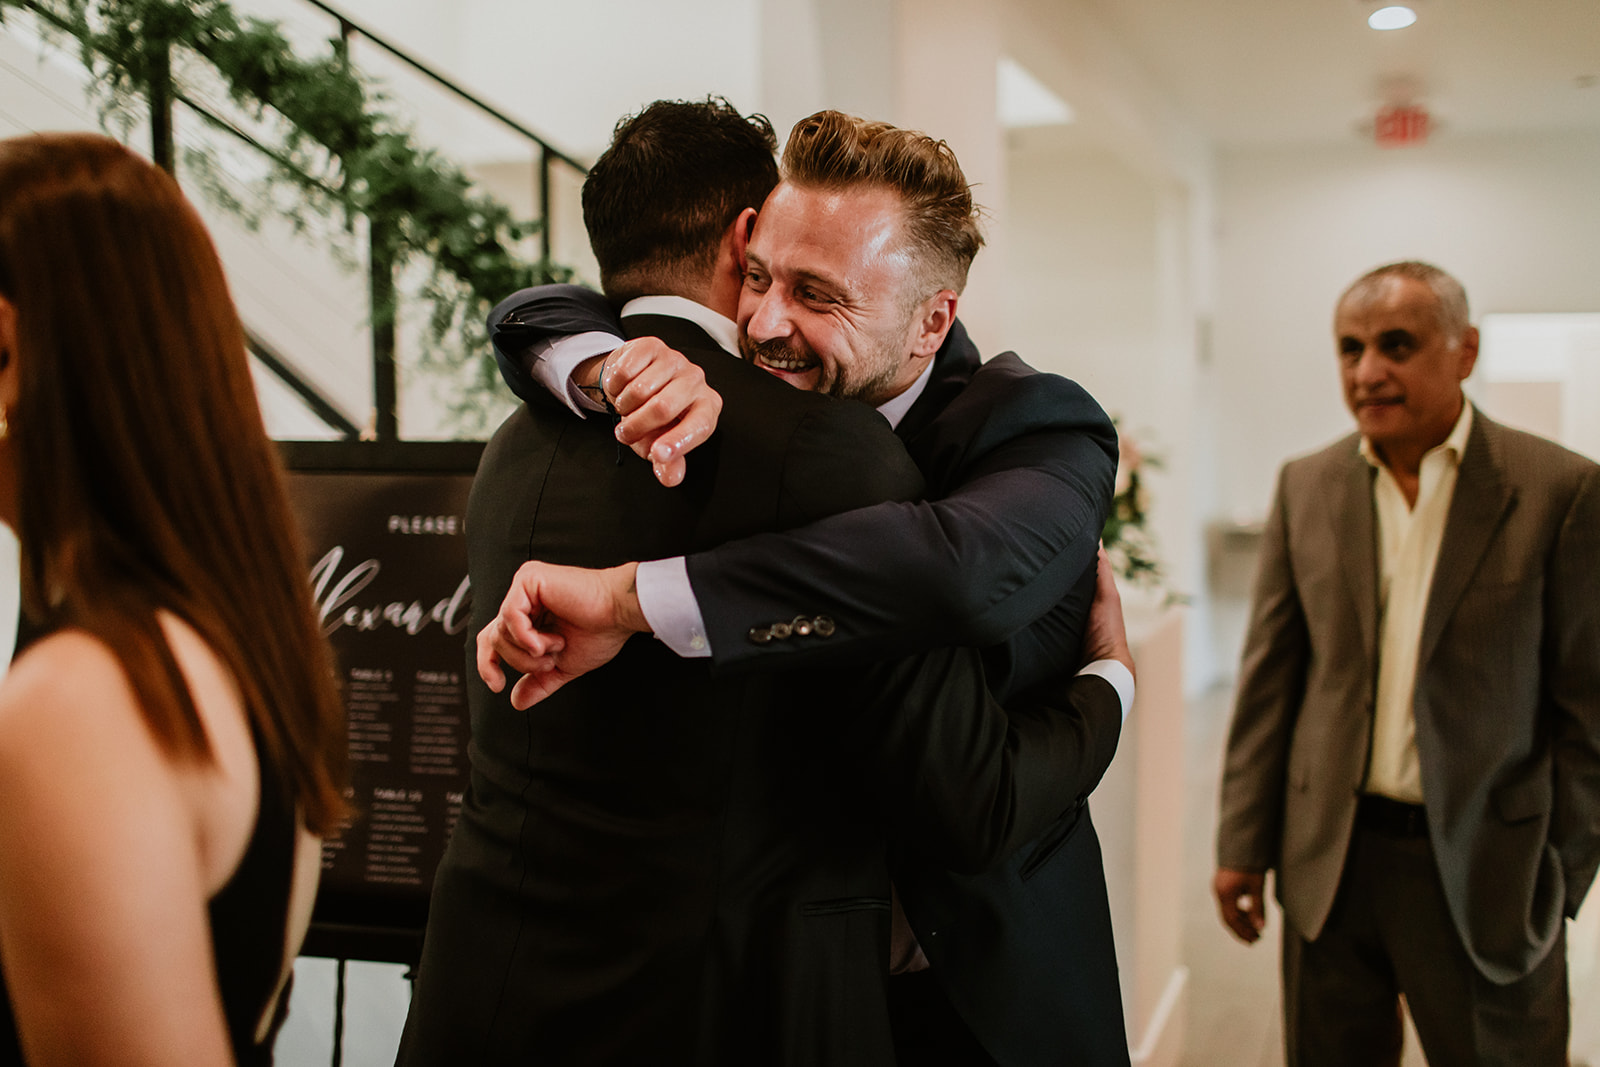 Groom Hugging Guest at Cocktail Hour 